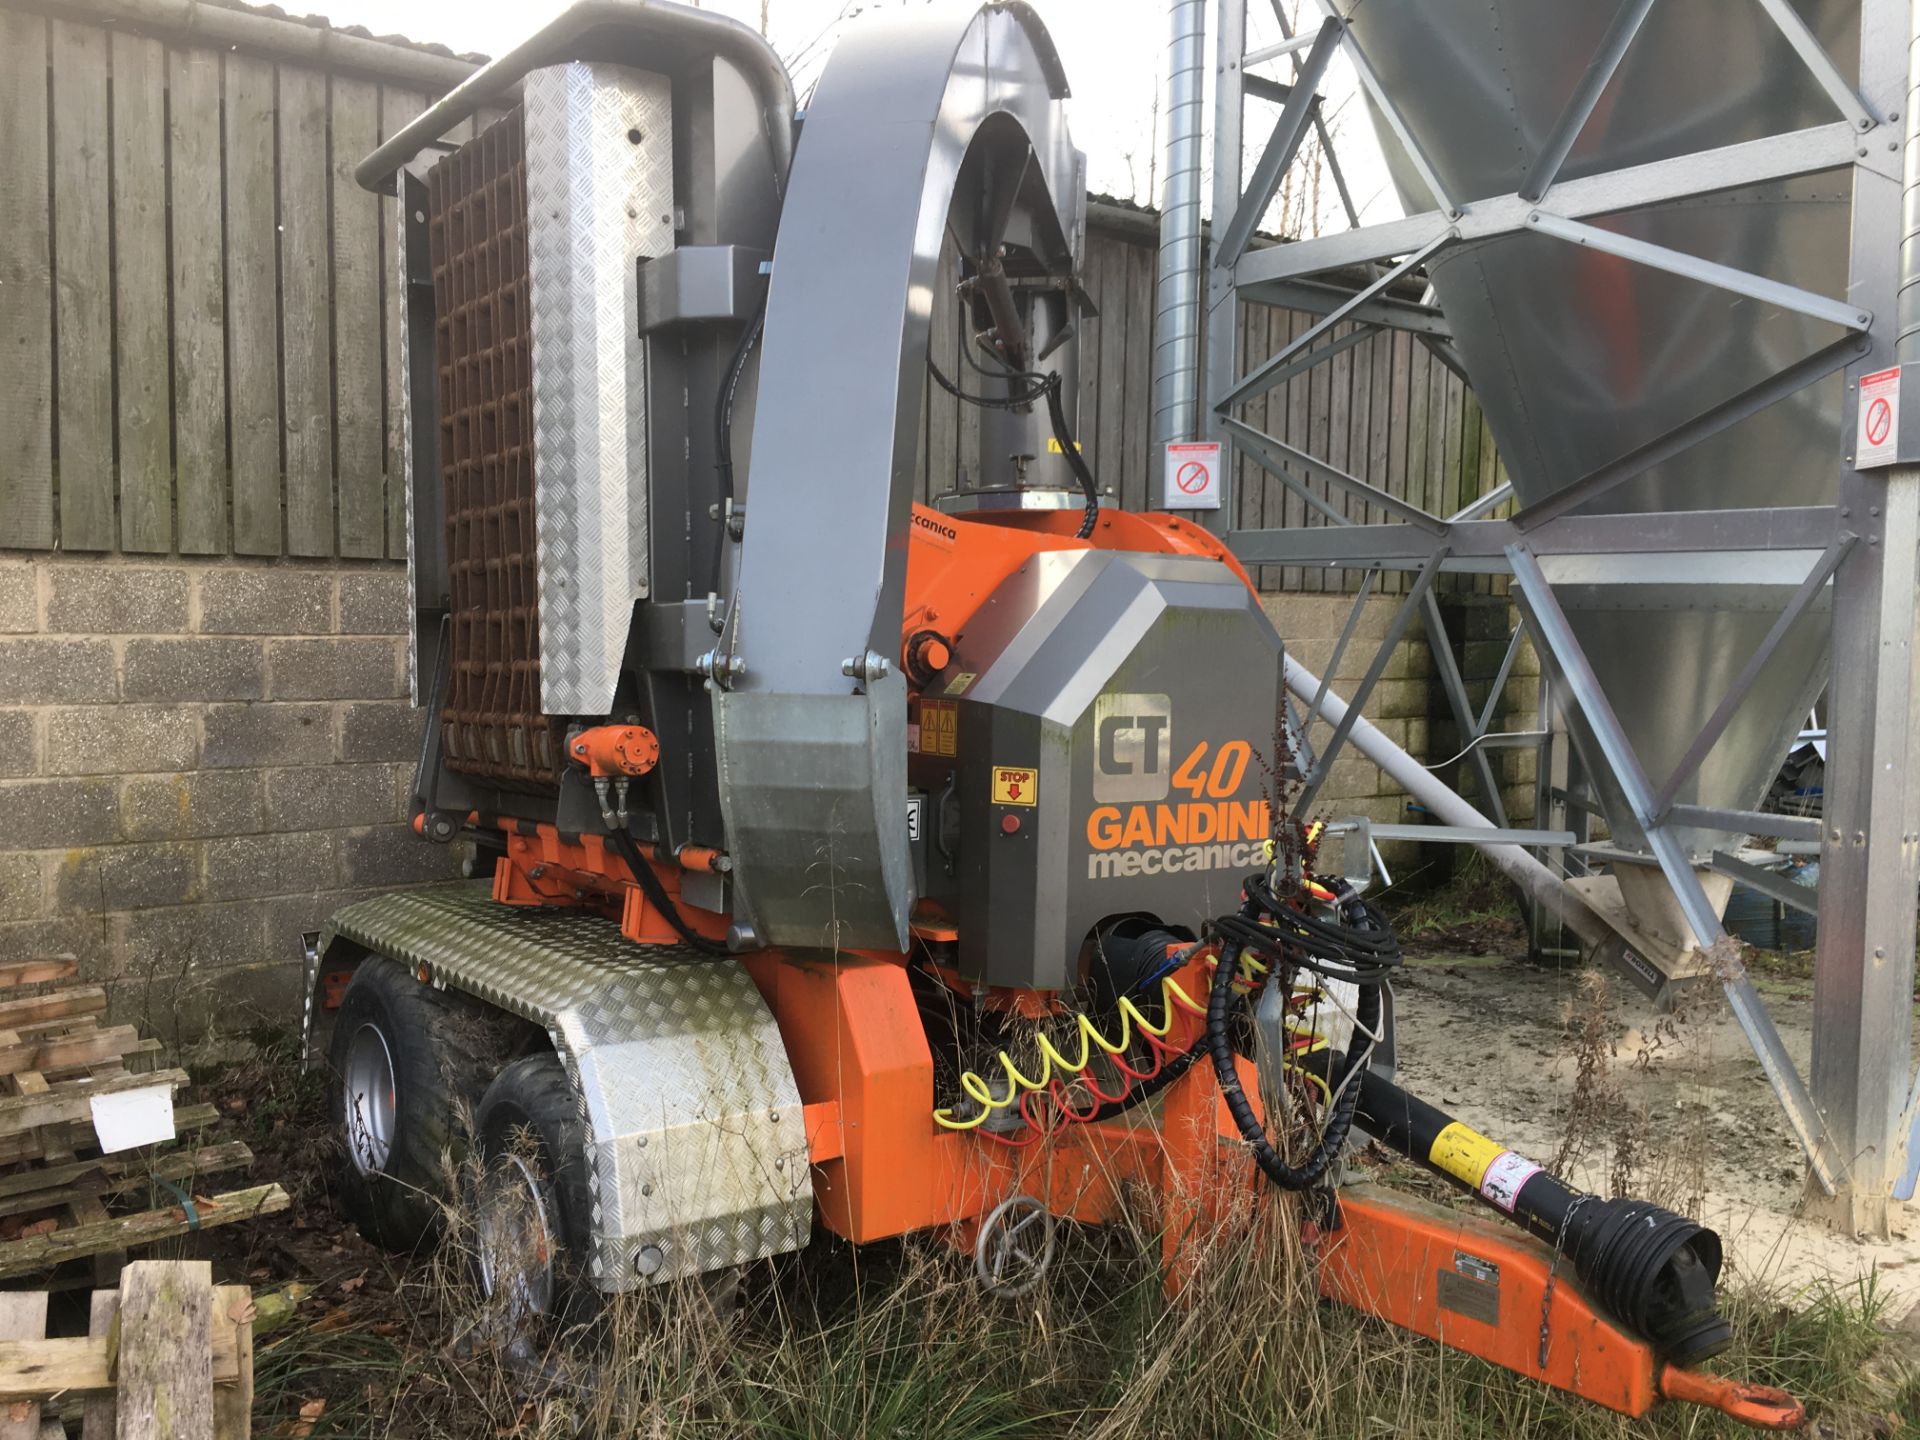 Gandini Meccanica CT40/75TTS MOBILE WOOD CHIPPER, serial no. CT40453, year of manufacture 2014, with